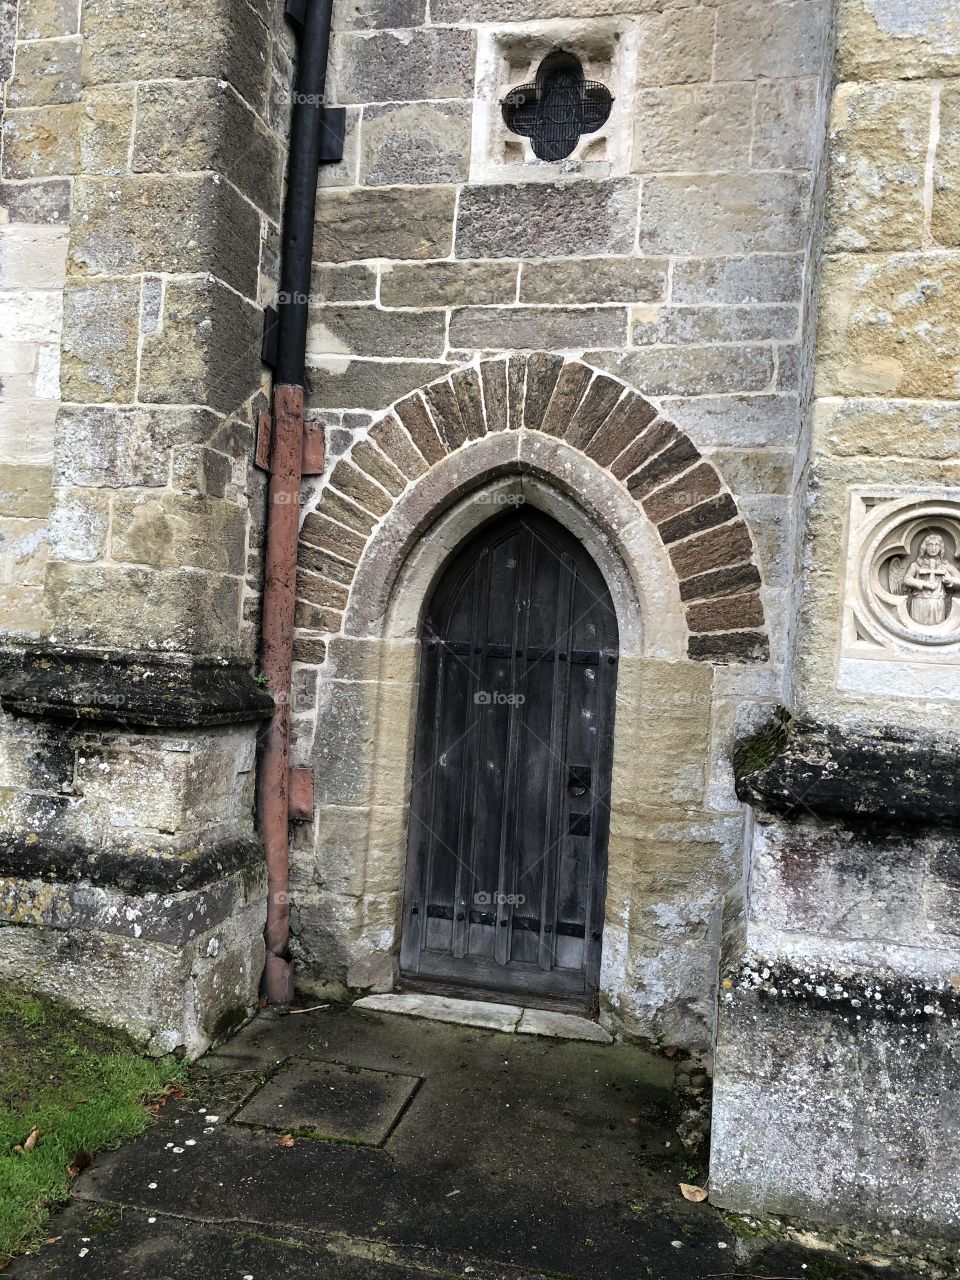 They are both impressive side entrances to Ottery St Mary Church, which one do you prefer?